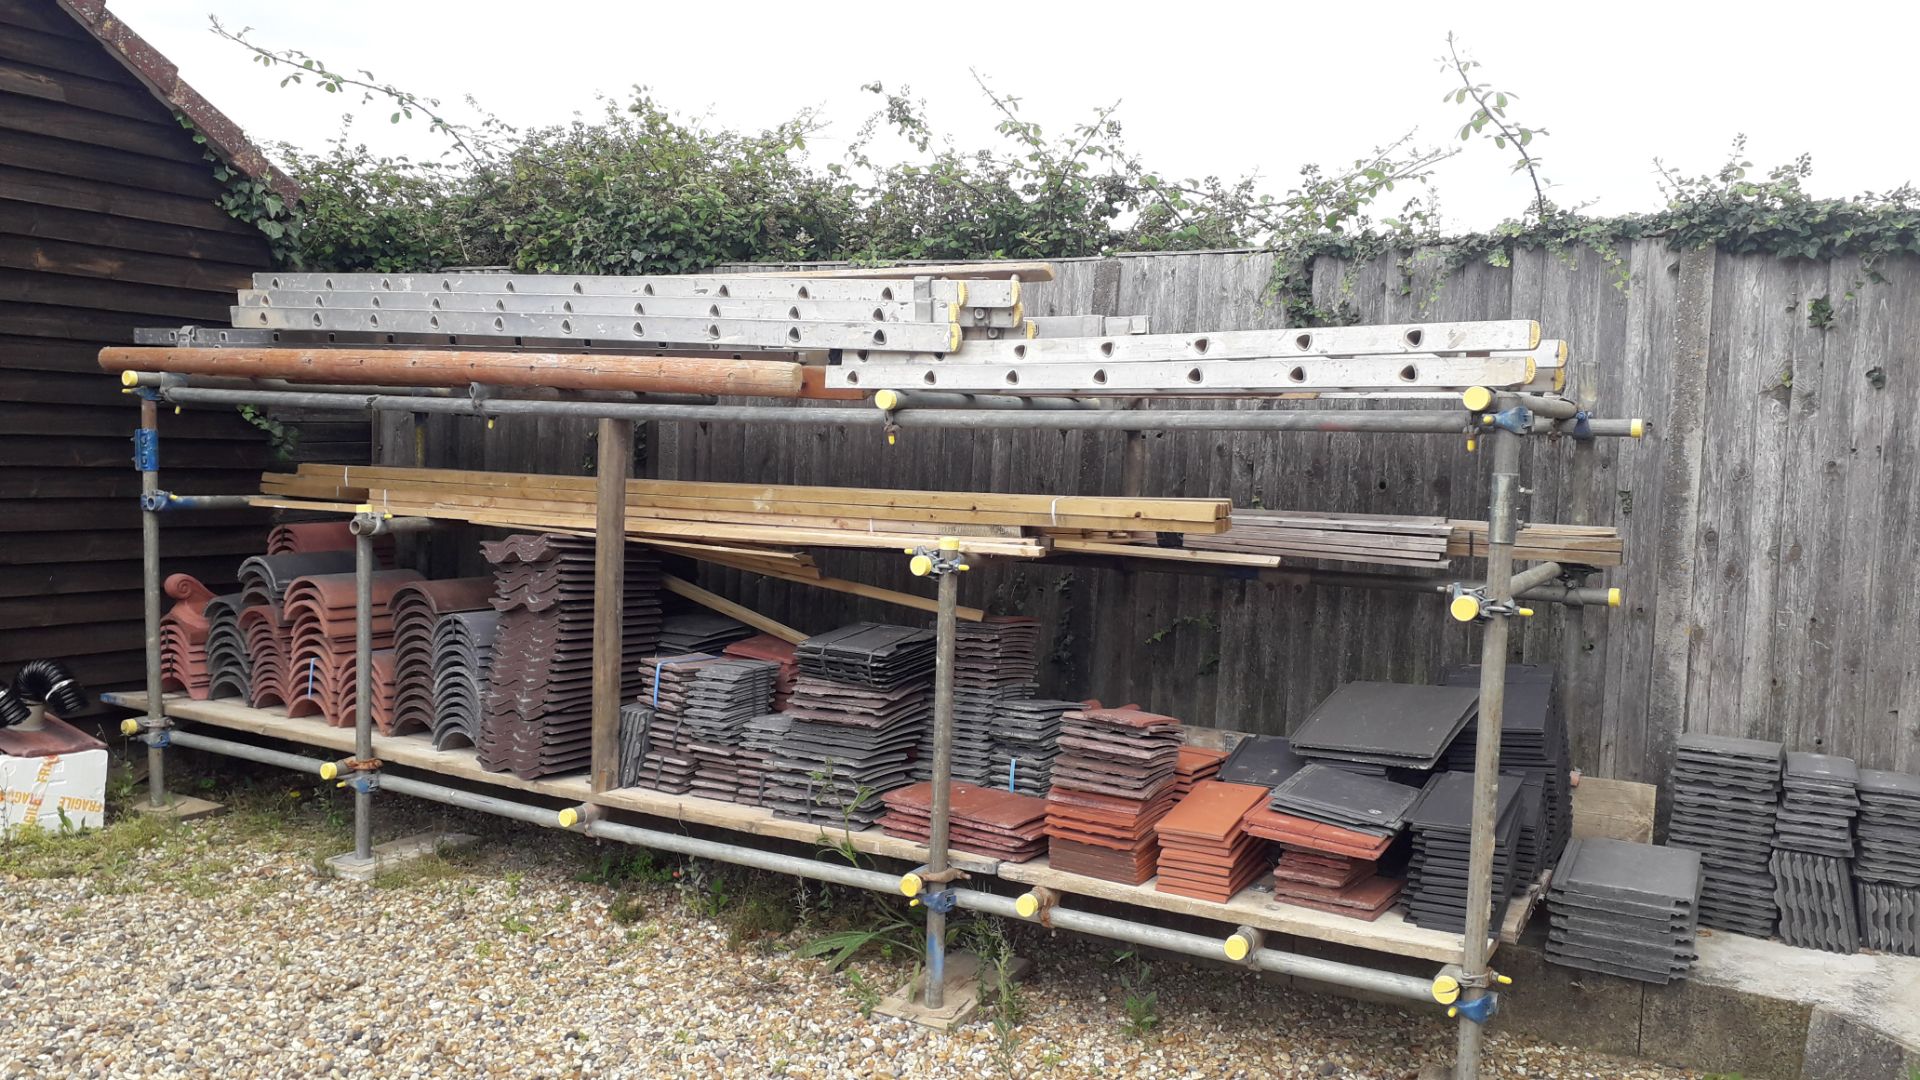 Scaffold Rack and Contents containing Various Tile